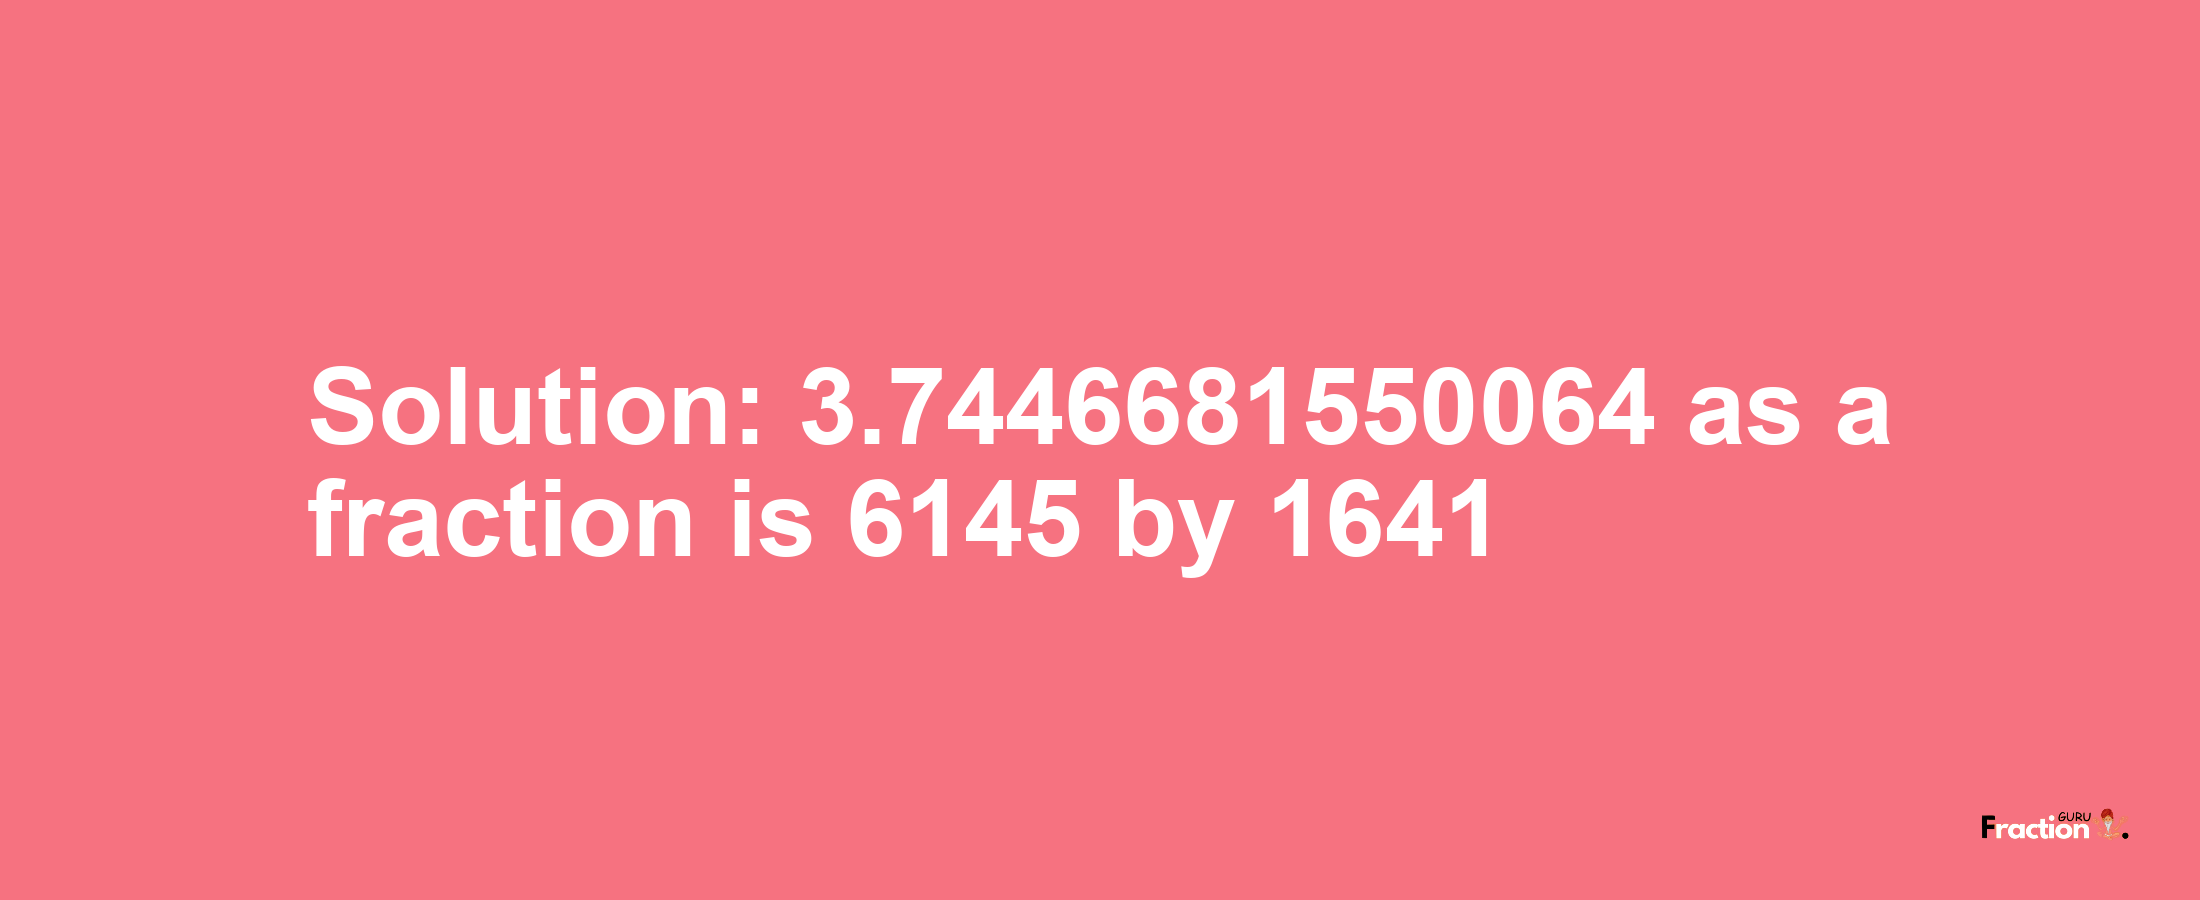 Solution:3.7446681550064 as a fraction is 6145/1641